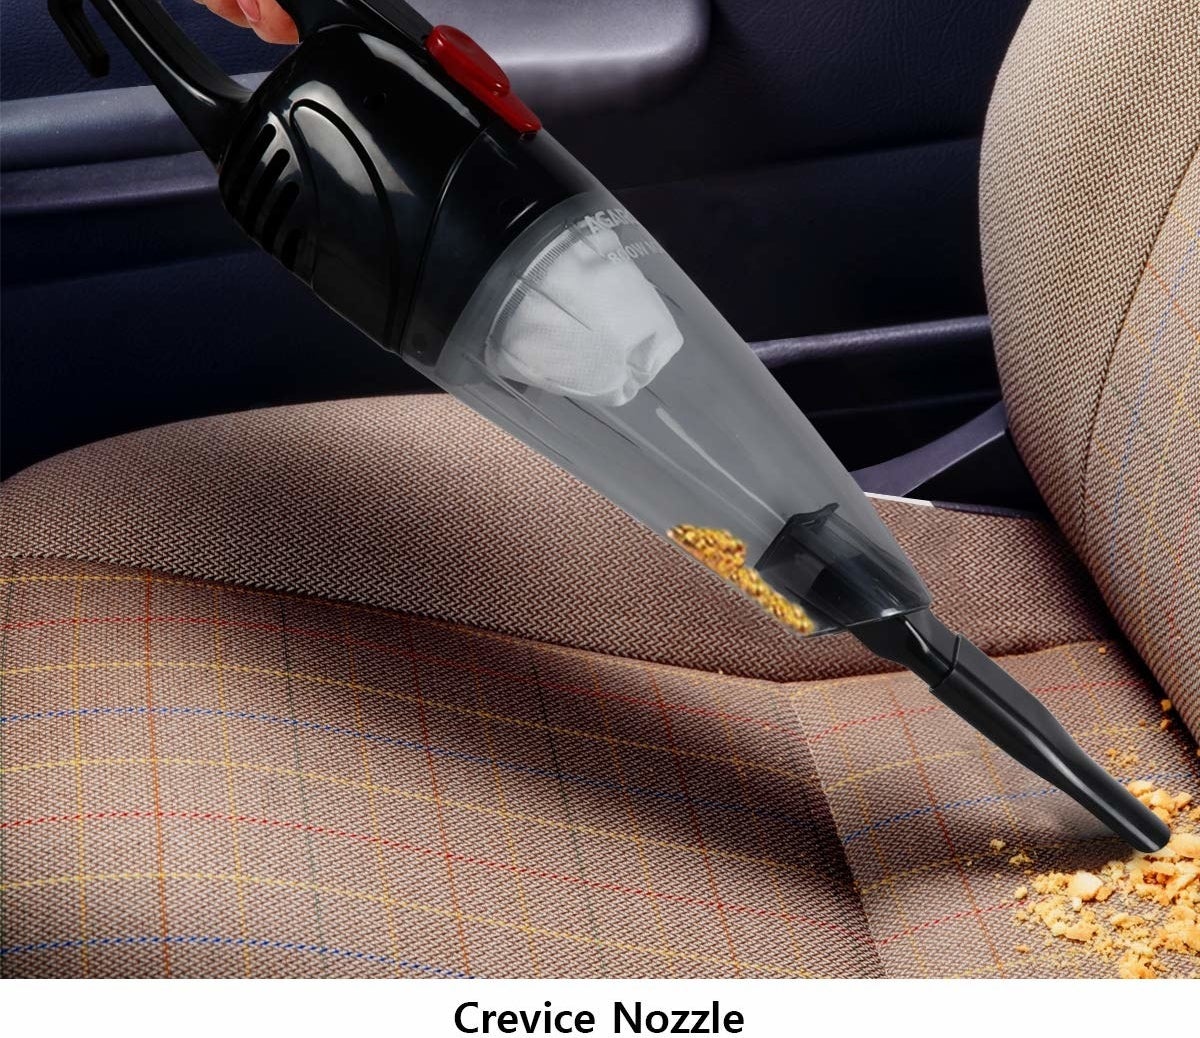 The handheld vacuum cleaner used to clean up crumbs from a car seat.